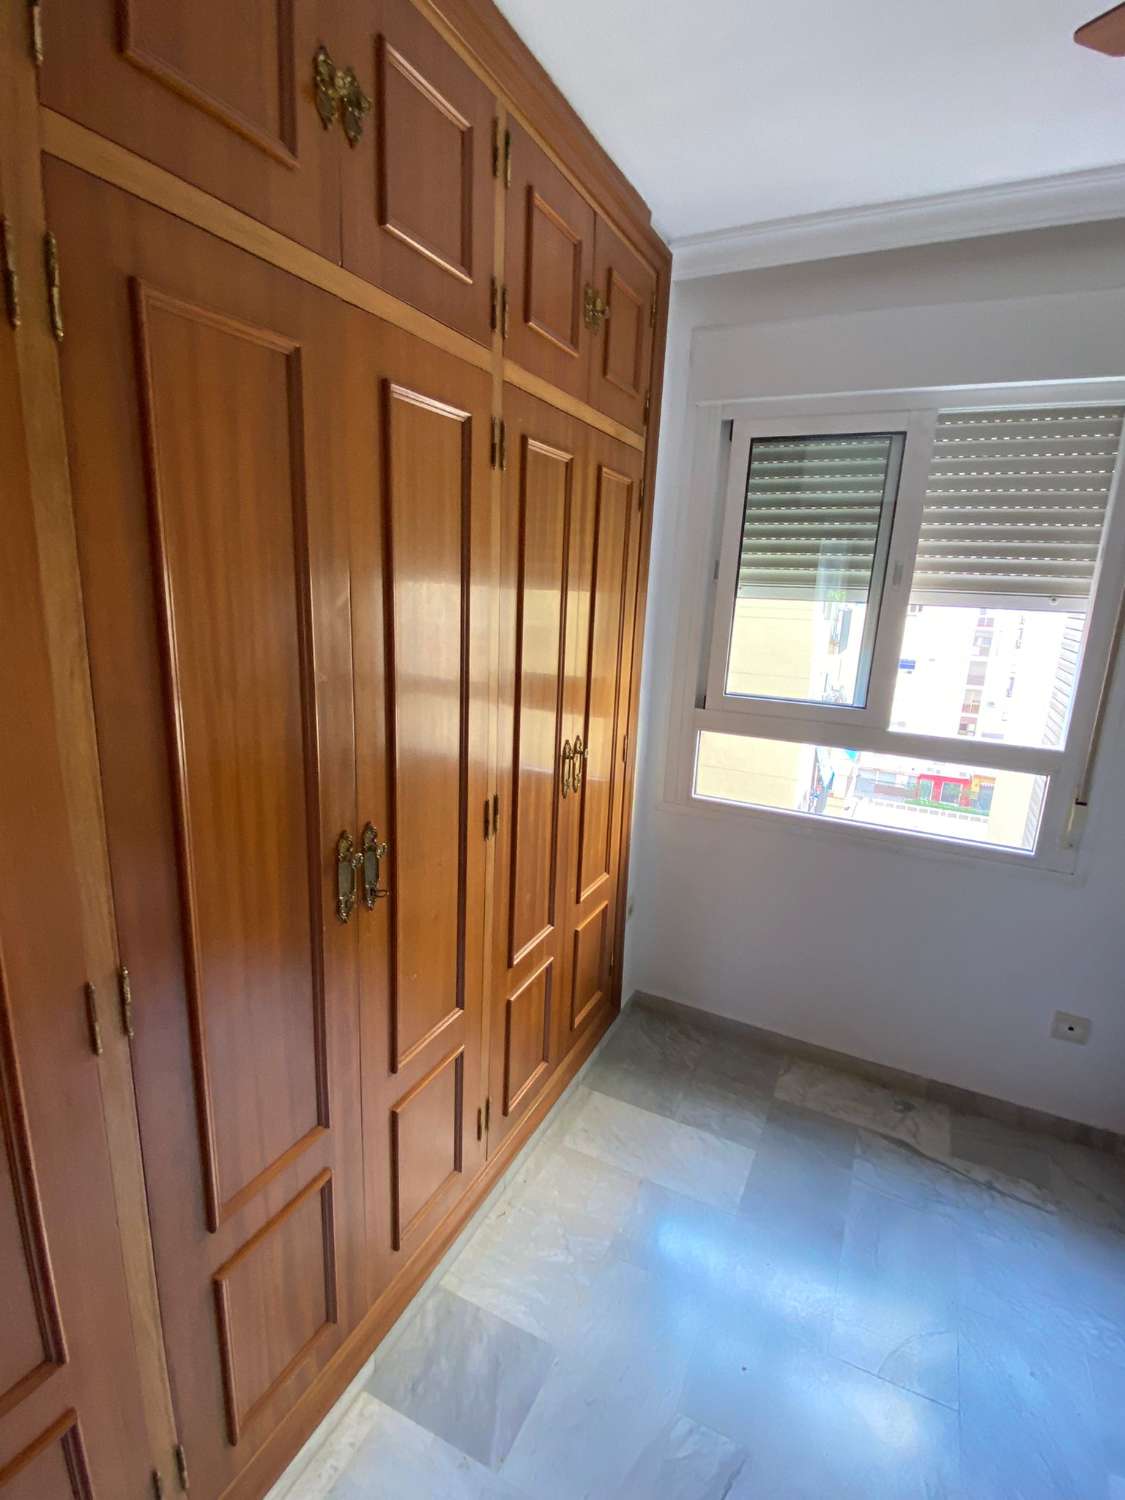 Spacious apartment with 4 bedrooms and 2 bathrooms, garage and storage room.